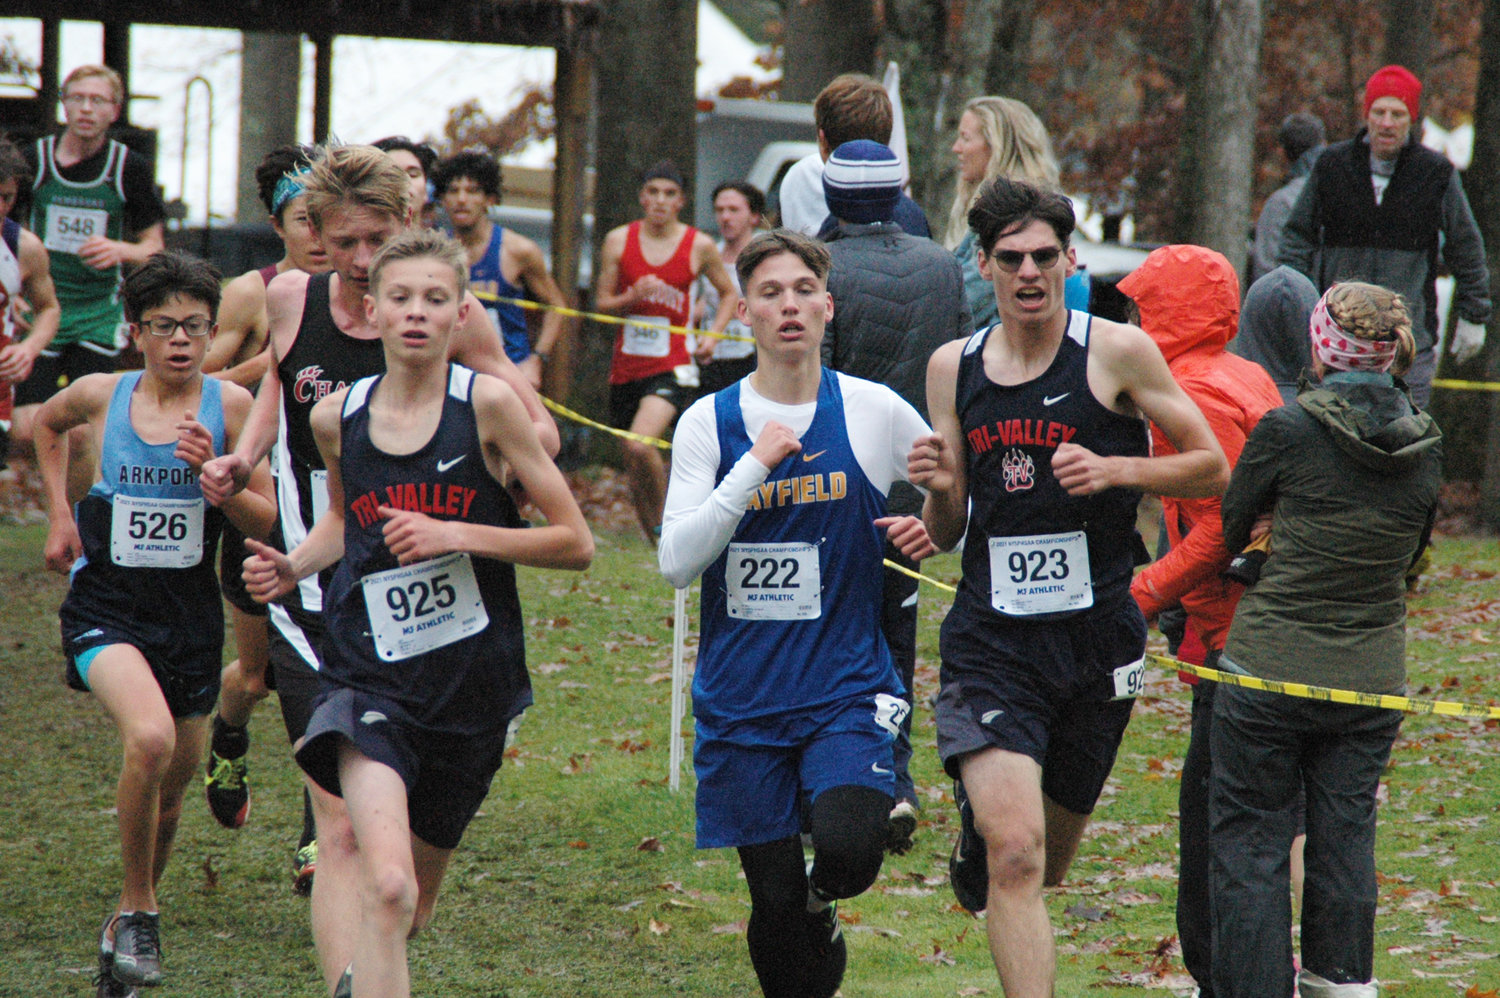 Van Furman (925) and Caleb Edwards (923) finished 17th and 18th respectfully. Their top-20 finishes helped bring home the State Championship for the Tri-Valley Bears.